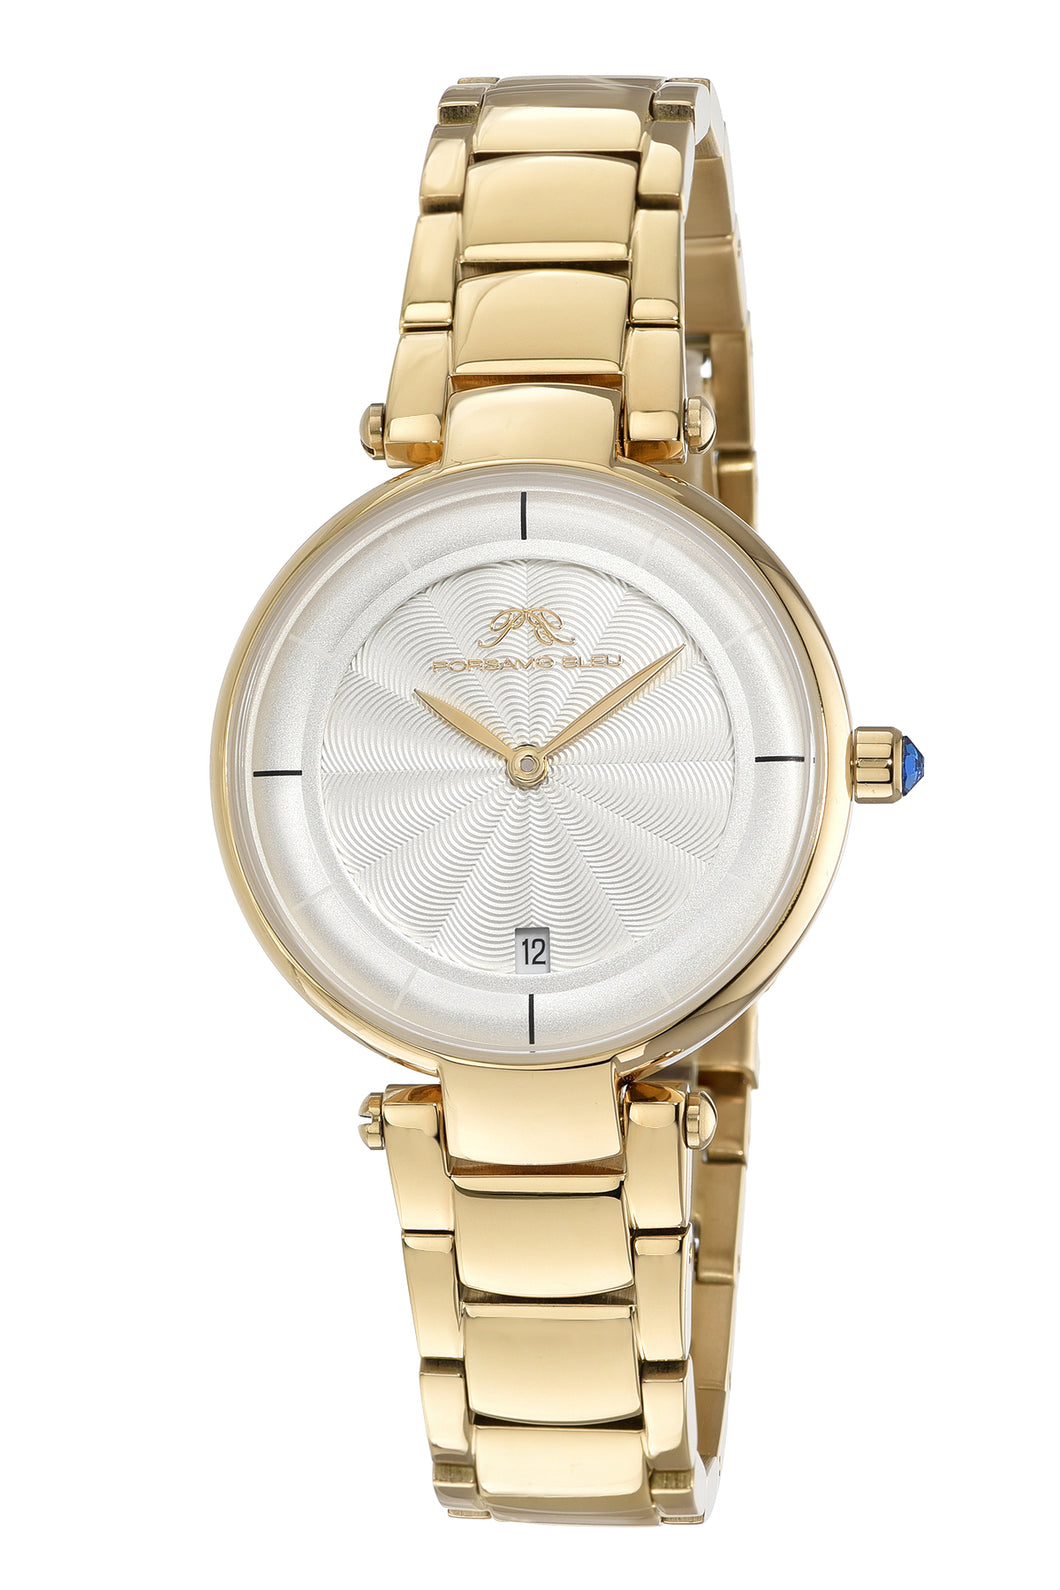 Madison Women's Gold Guilloche Dial Watch, 1151BMAS